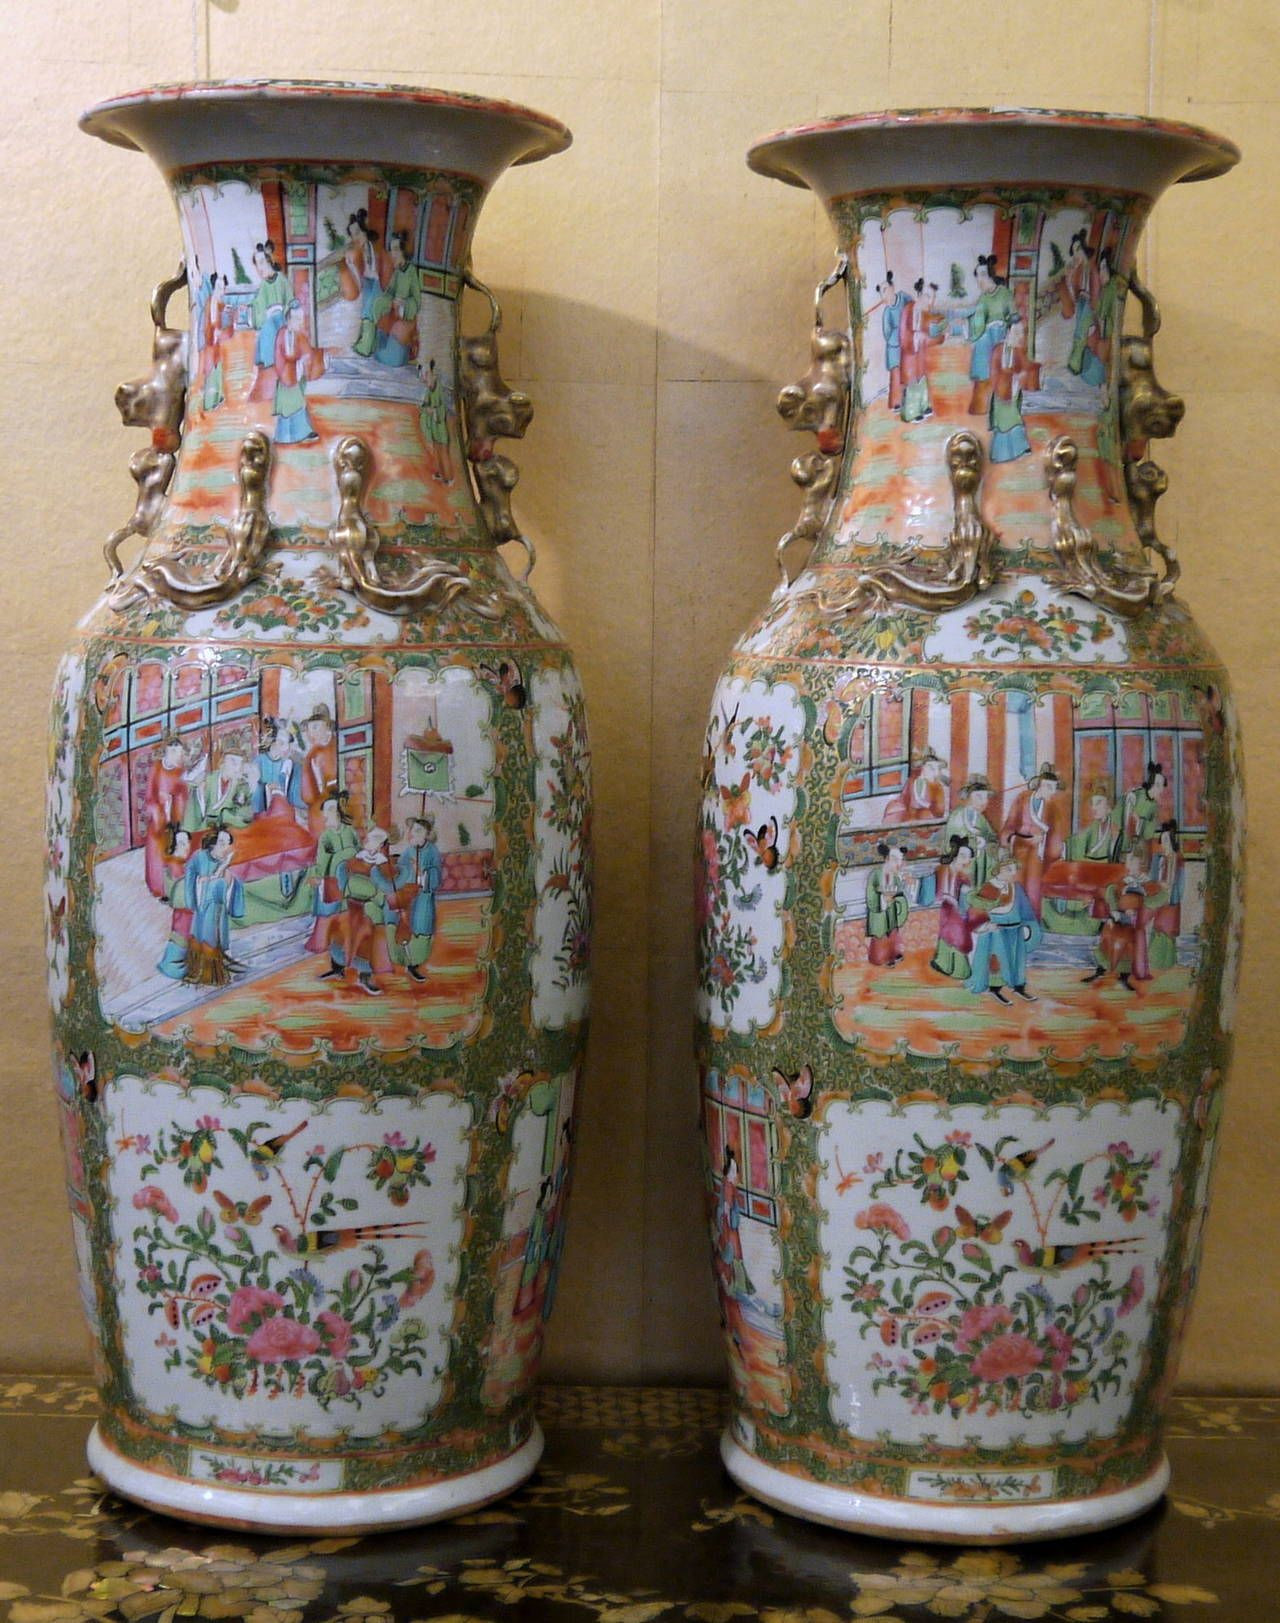 20 Fabulous Chinese Porcelain Vases for Sale 2022 free download chinese porcelain vases for sale of pair of large chinese rose canton vases in 2018 artwork for pair of large chinese rose canton vases 2